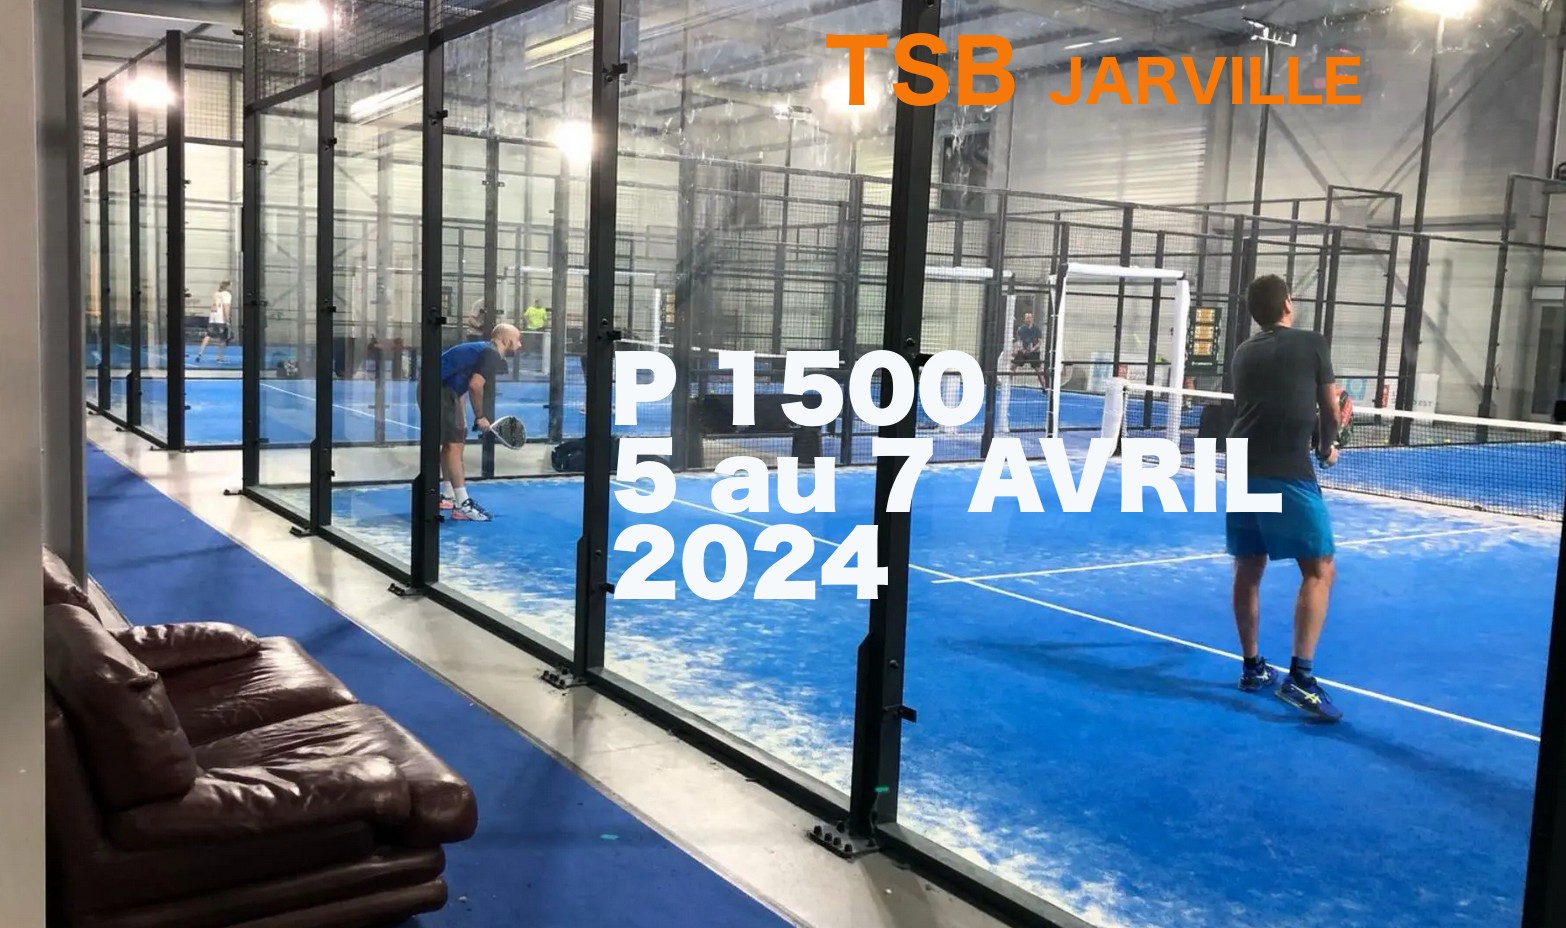 P1500 Jarville by Total Padel – Surprises before the quarters